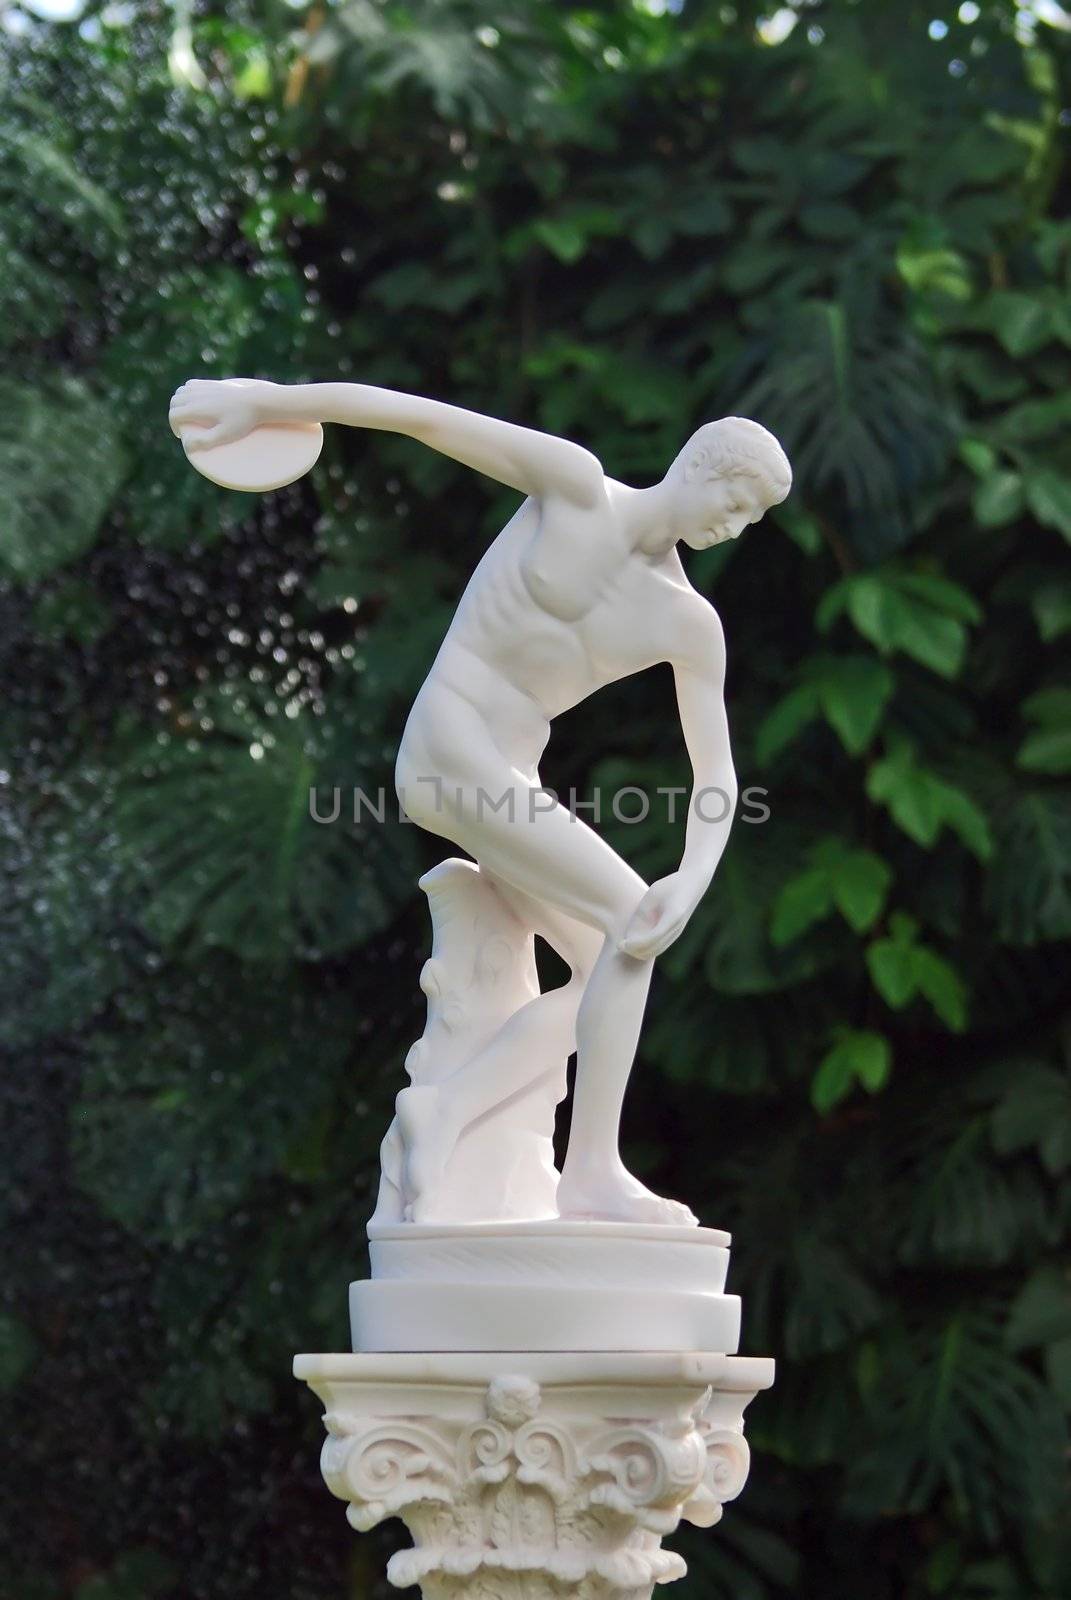 The sculpture of discobolus in park over green leaves